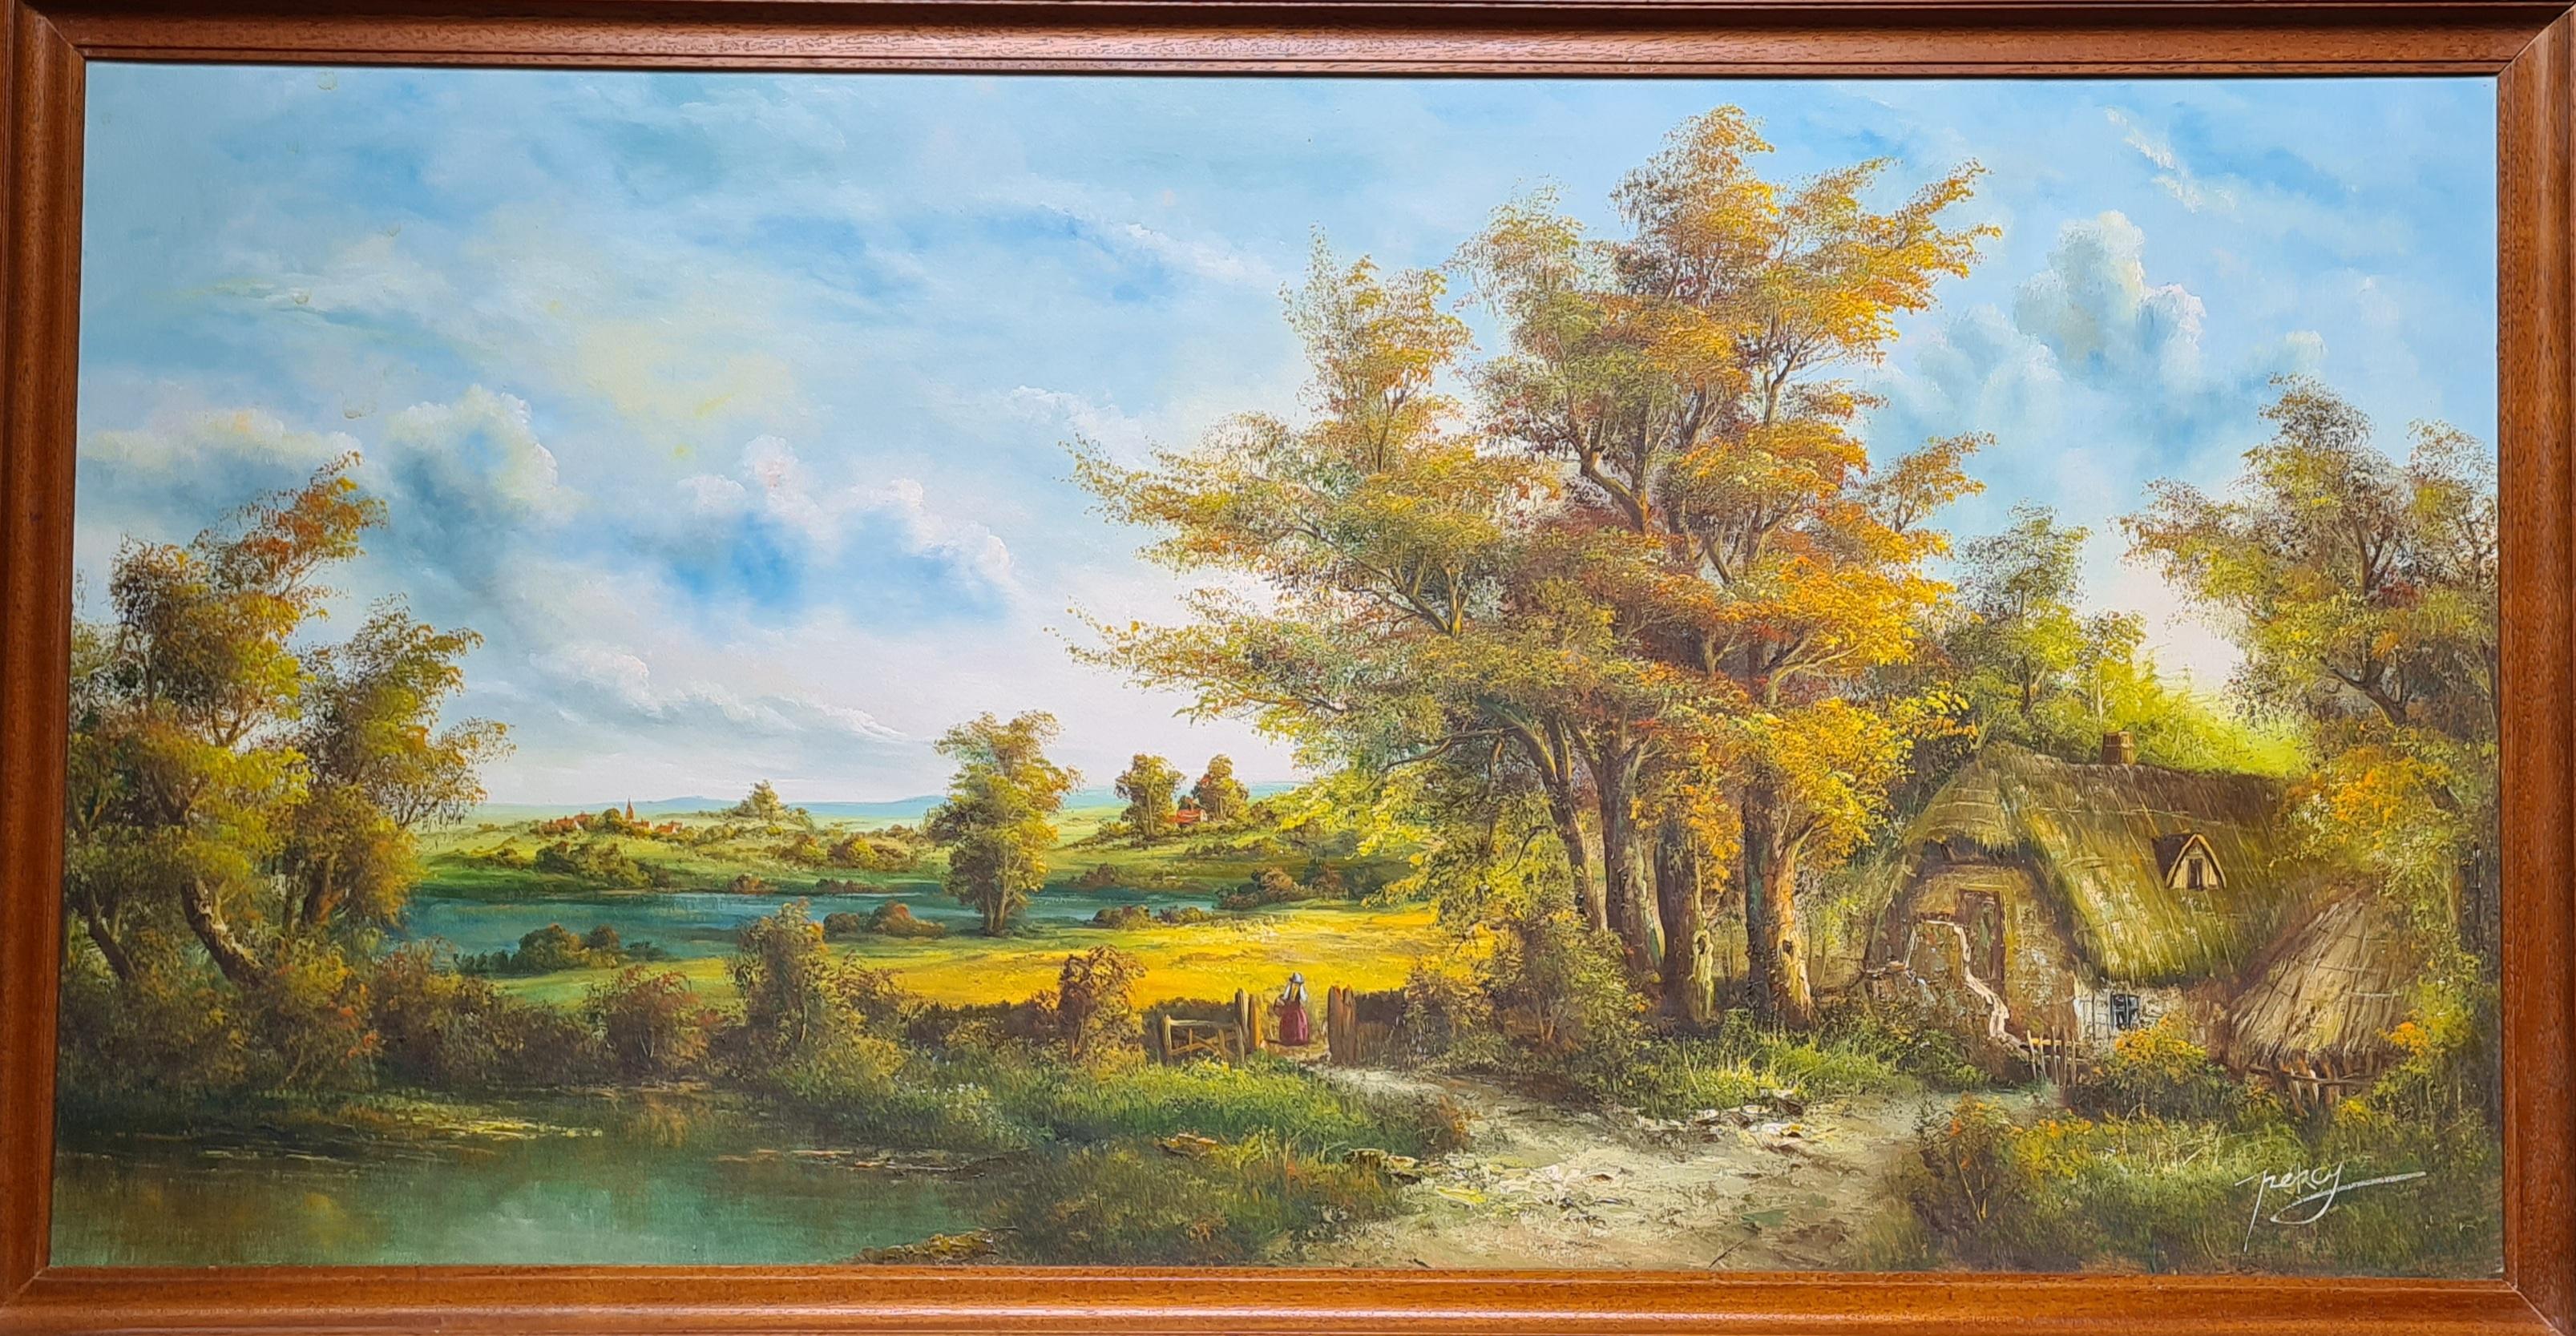 The Cottage, A Rural Idyll, Large Scale French Country Landscape. Oil on Canvas.